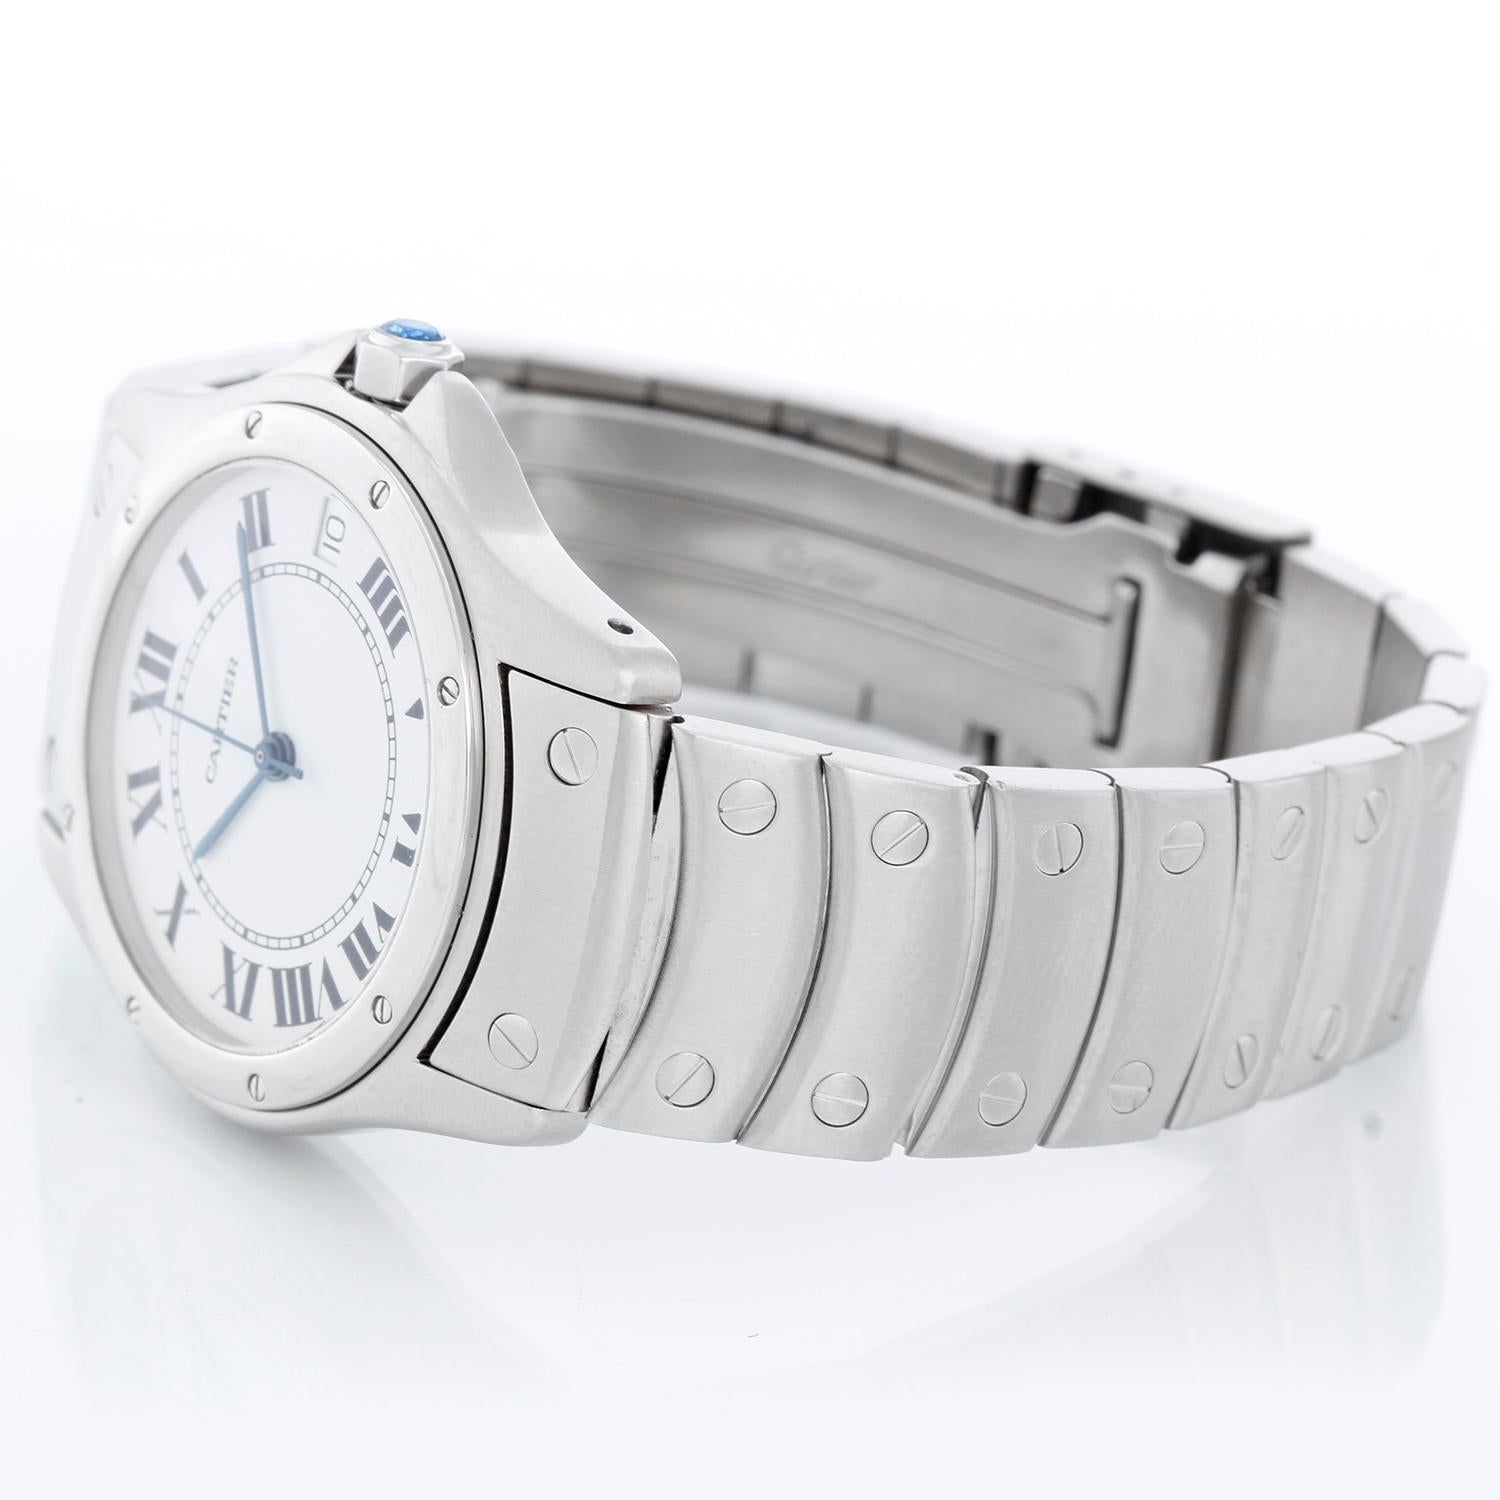 Cartier Santos Men's/Ladies Midsize 33mm Stainless Steel Automatic Watch - Automatic. Stainless steel case (33mm diameter). White dial with black Roman numerals. Stainless steel bracelet; will fit up to a 7 inch wrist. Pre-owned with custom box. 